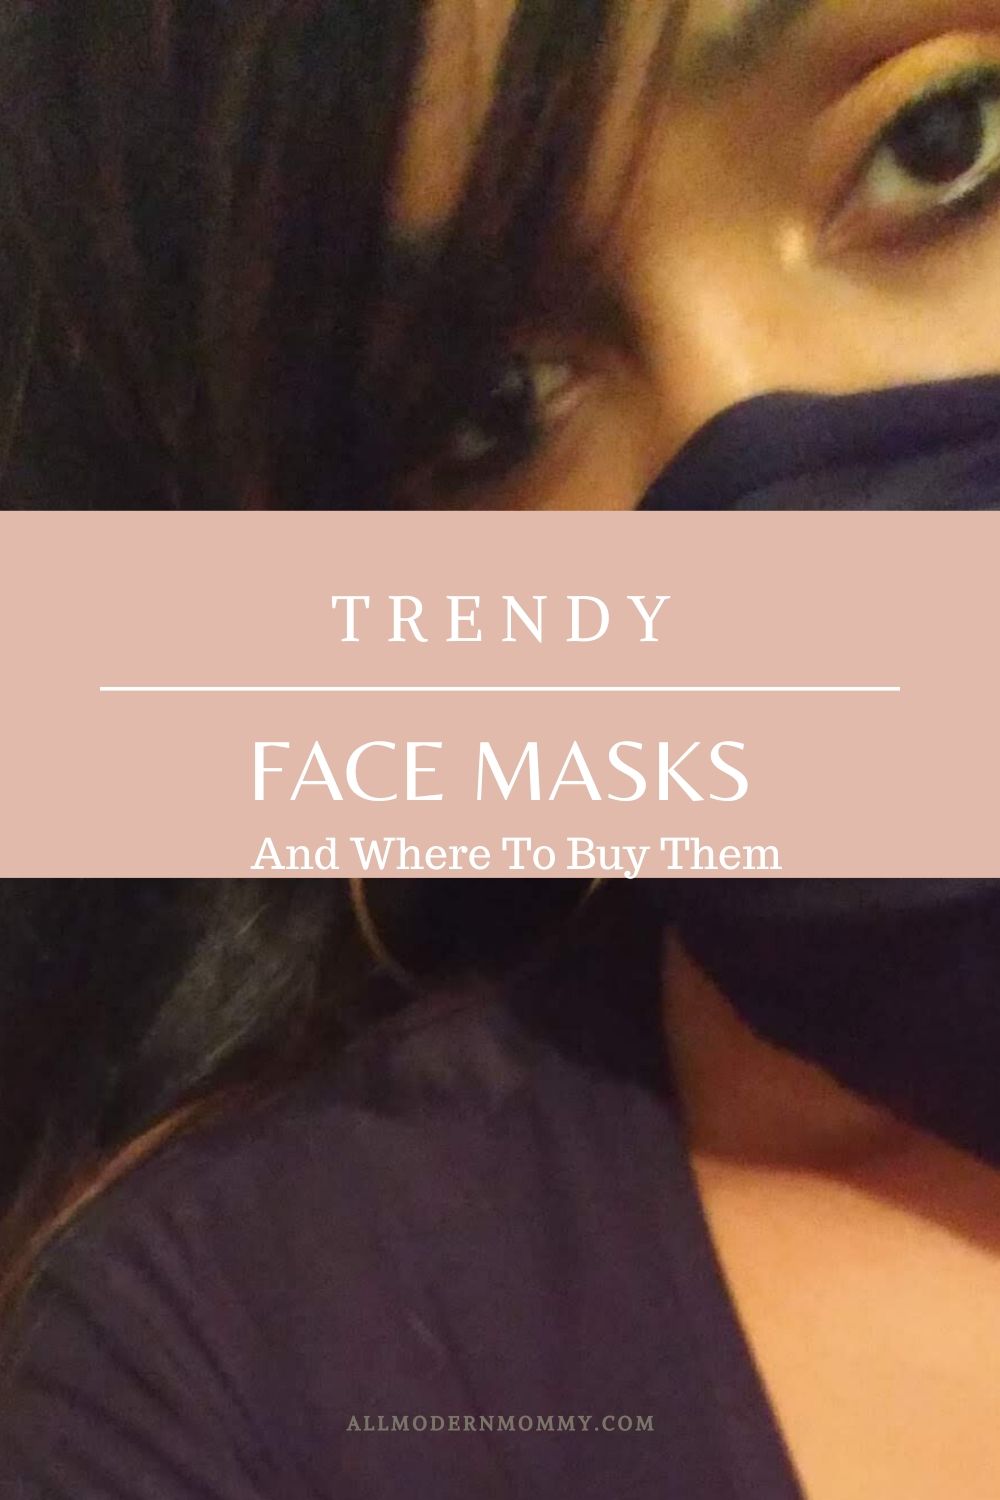 Where To Buy Face Masks For Adults?